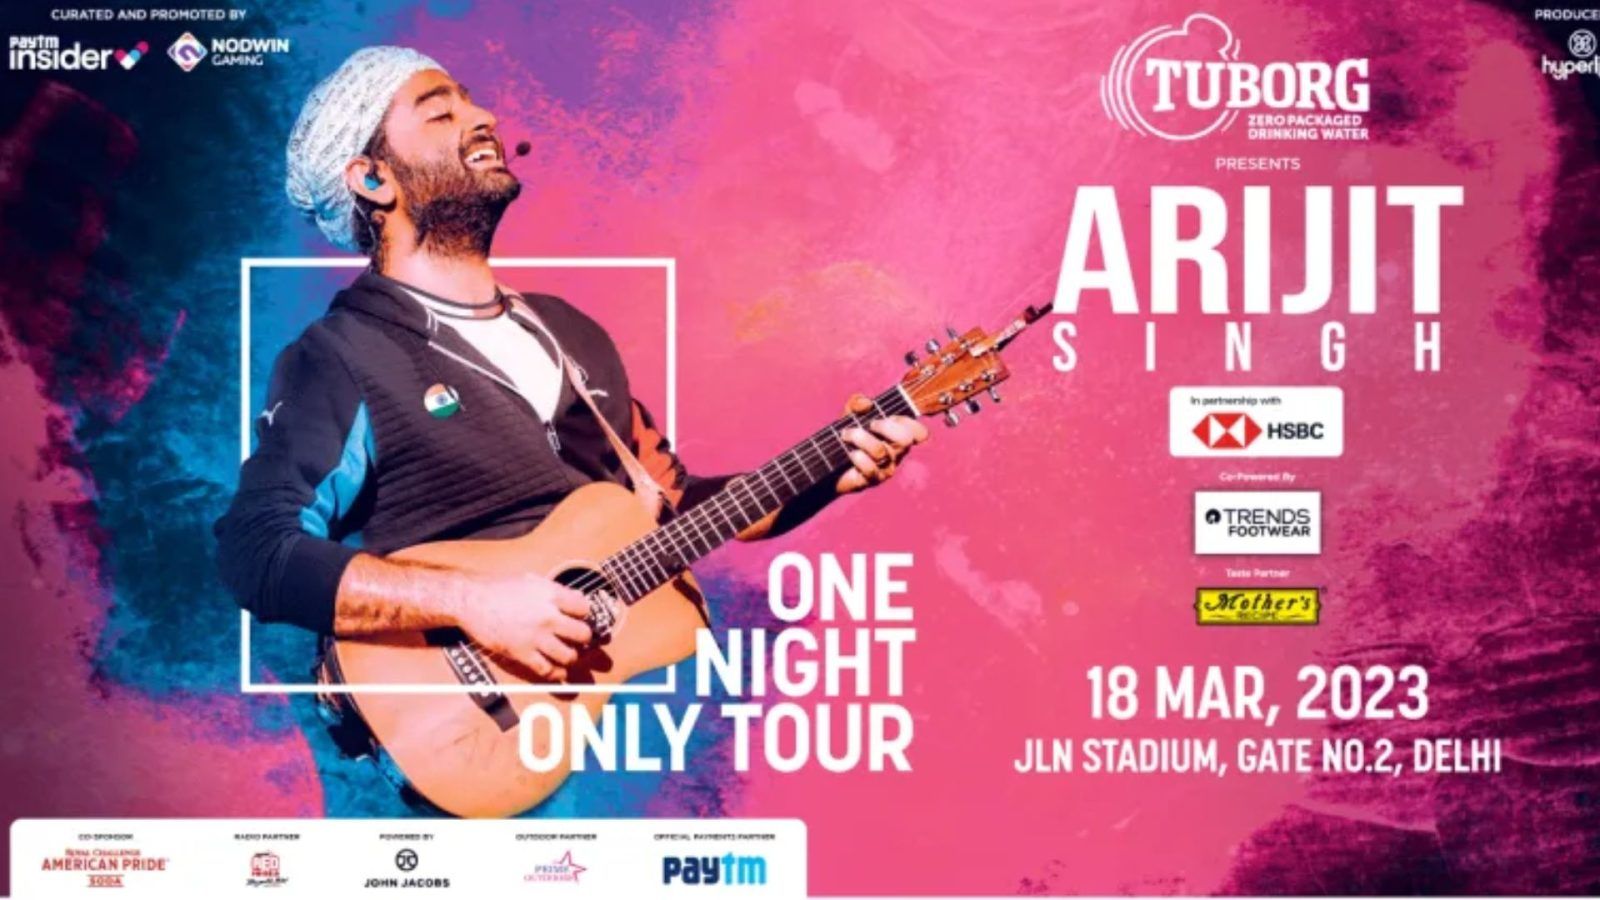 All you need to know about Arijit Singh's Delhi concert 2023